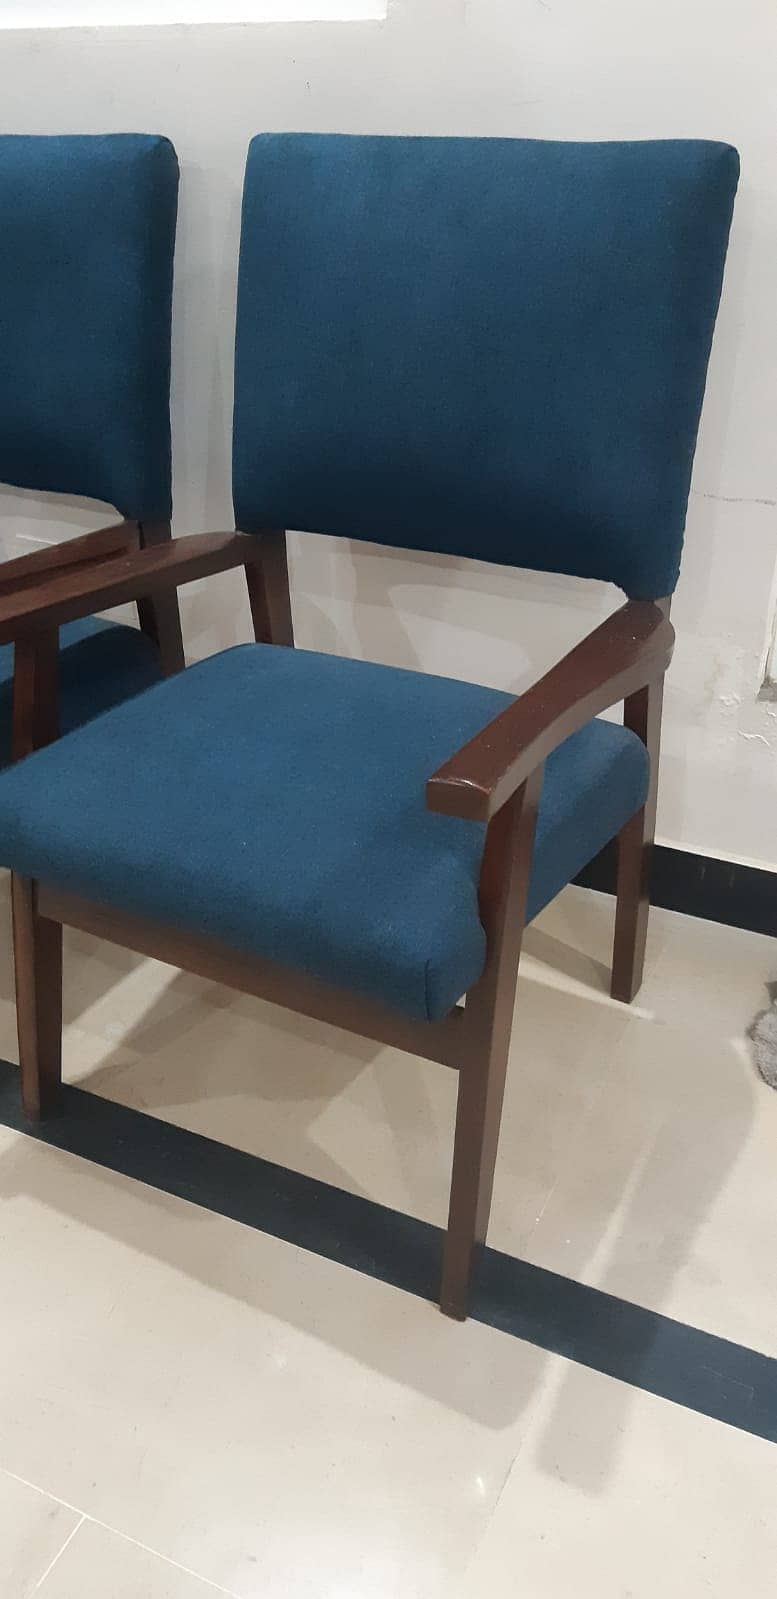 5 Room Chairs For Sale 4